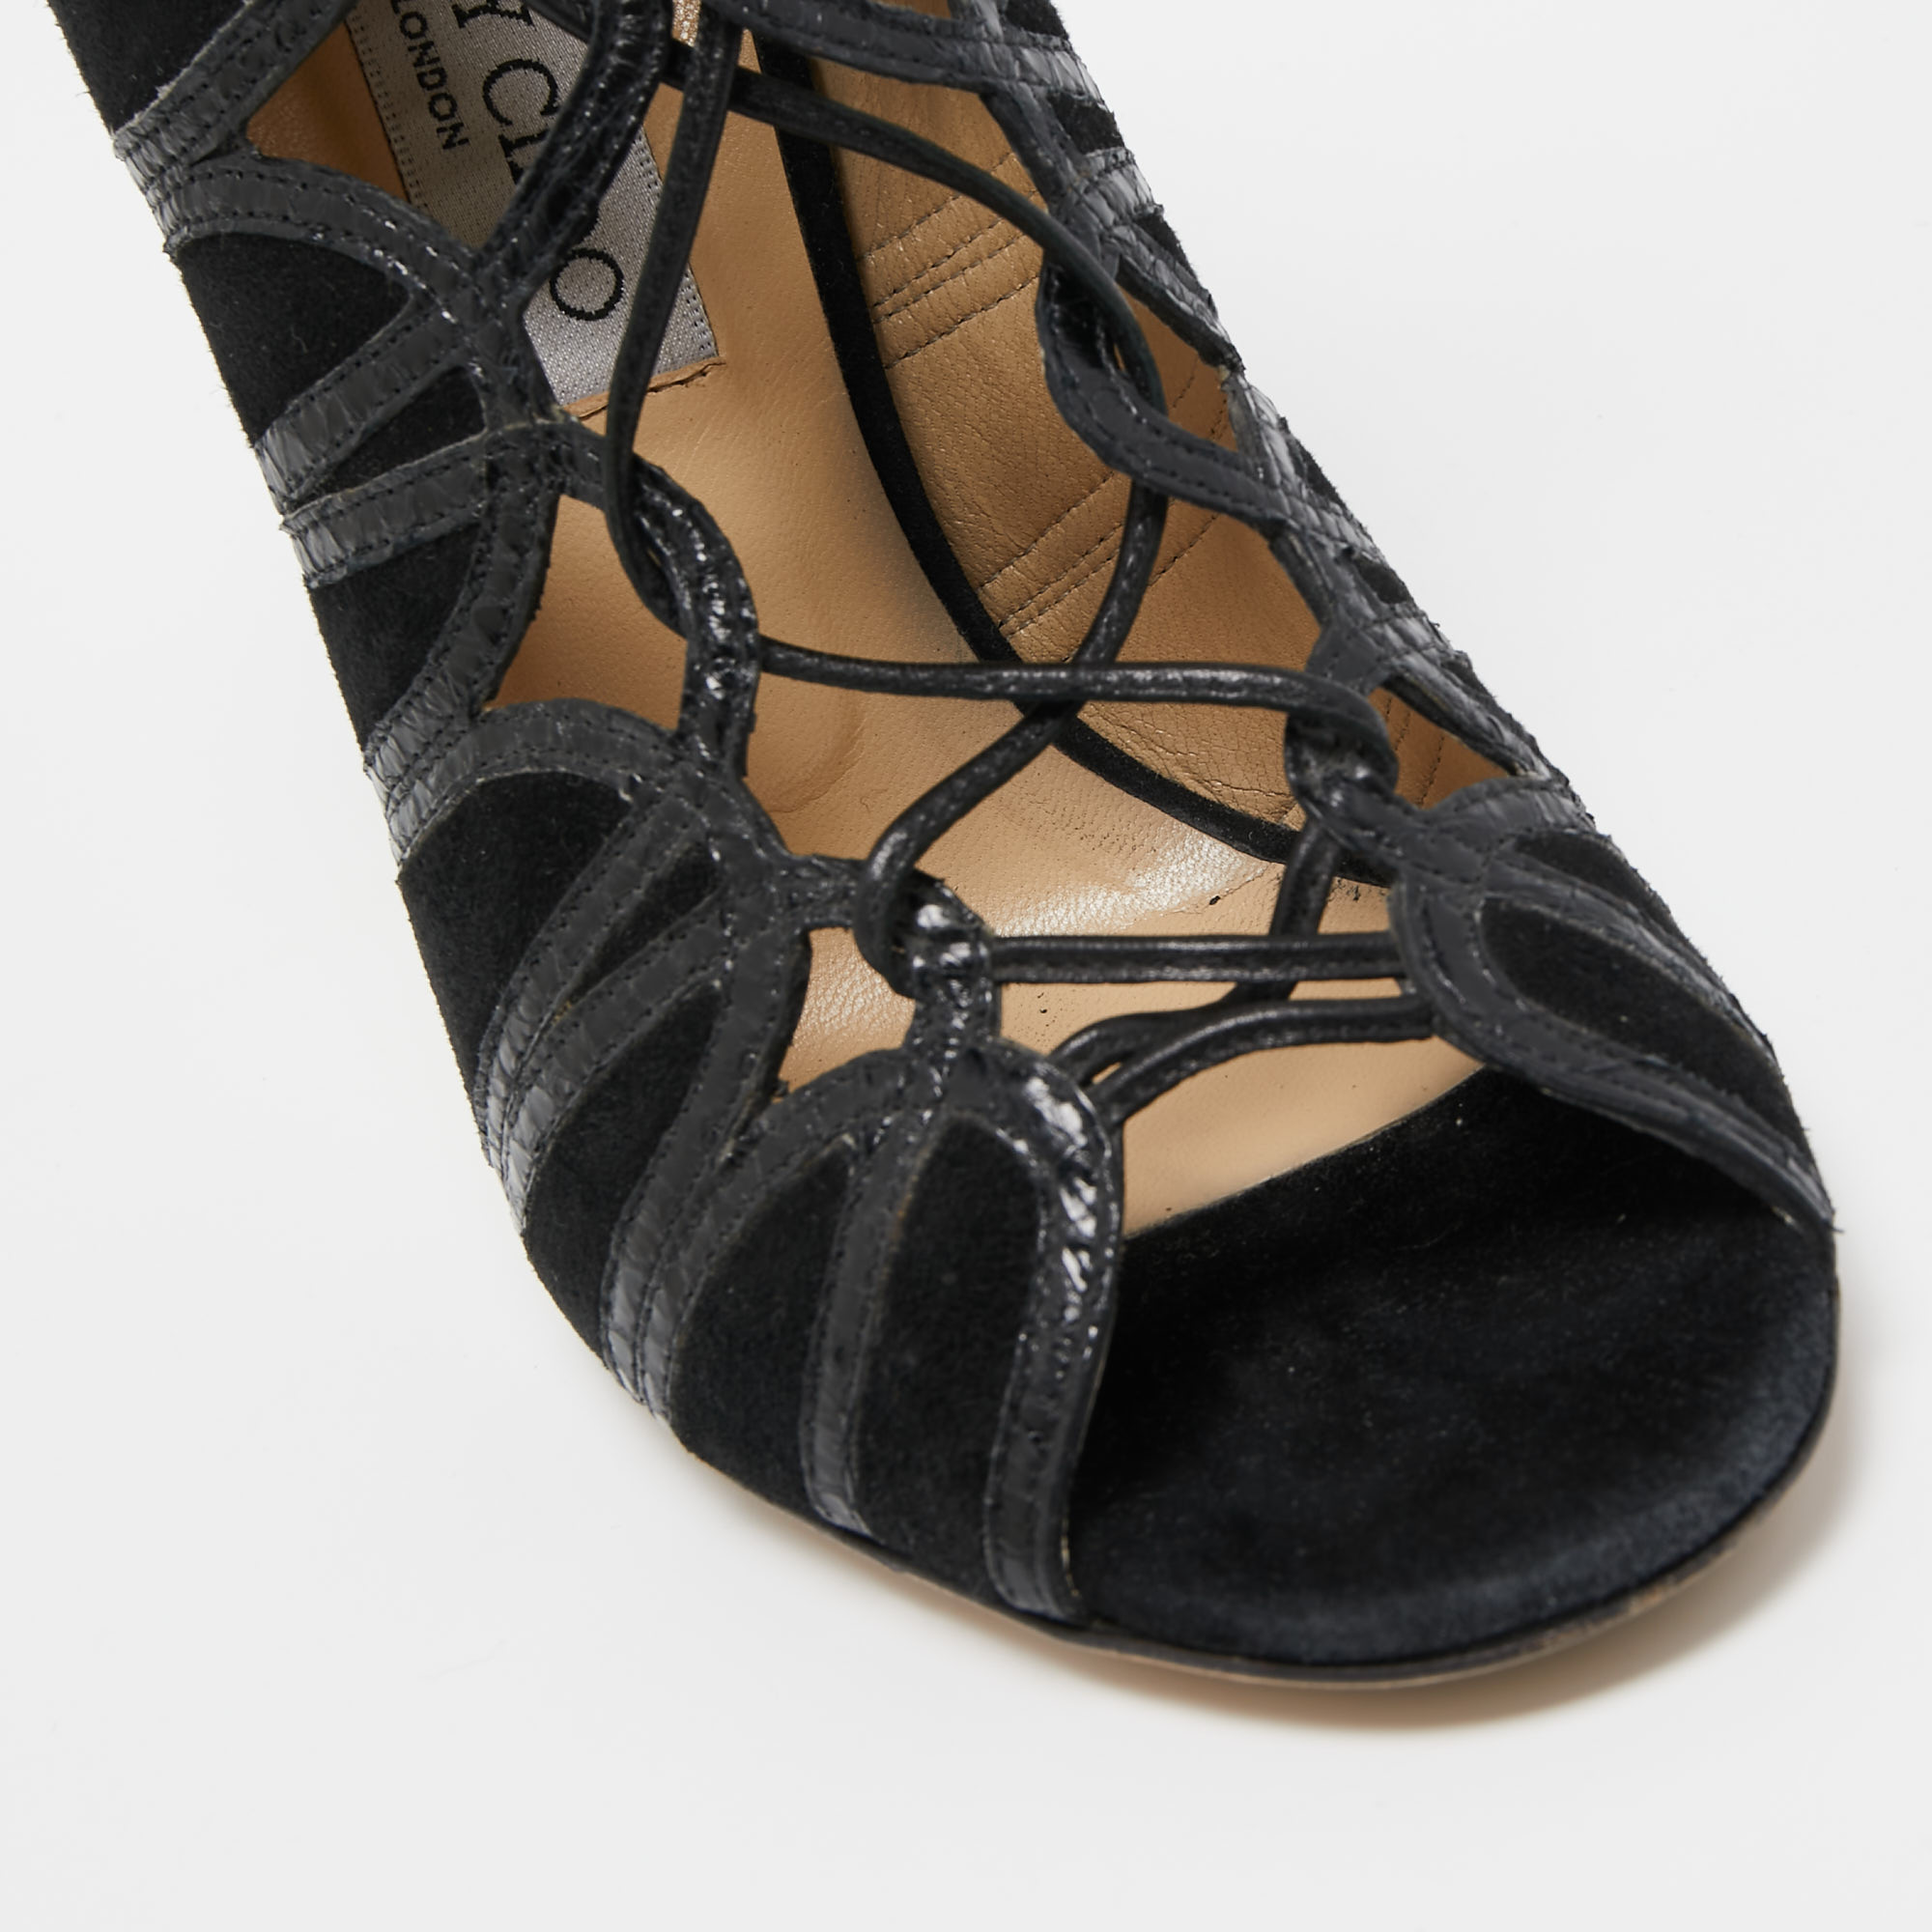 Jimmy Choo Black Python And Suede Lace Up Pumps 37